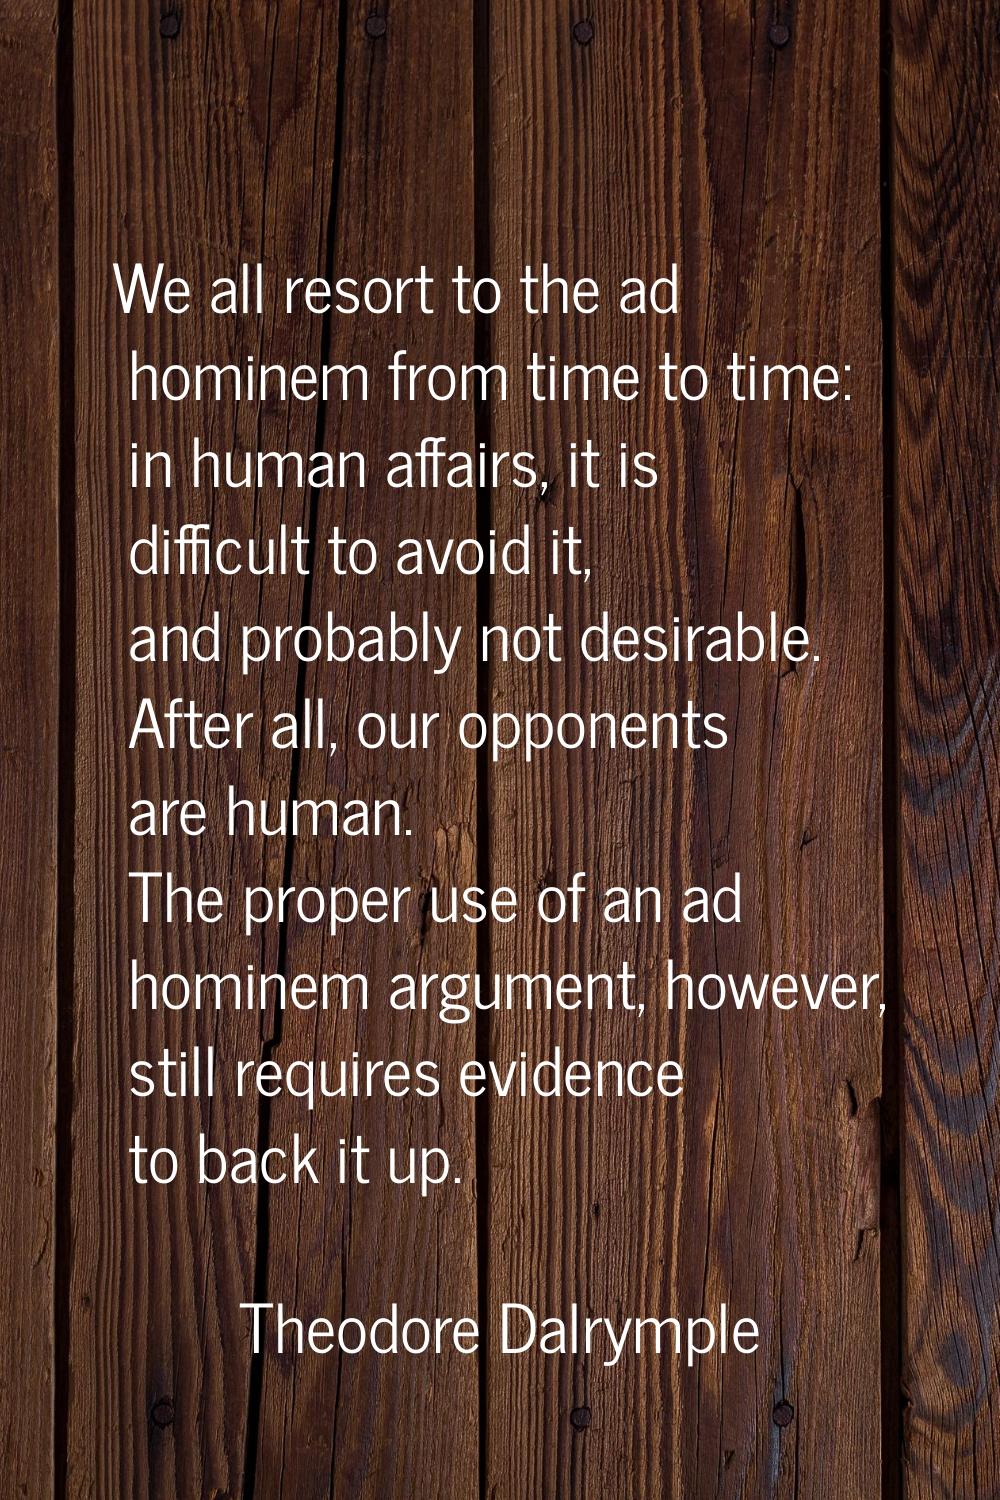 We all resort to the ad hominem from time to time: in human affairs, it is difficult to avoid it, a